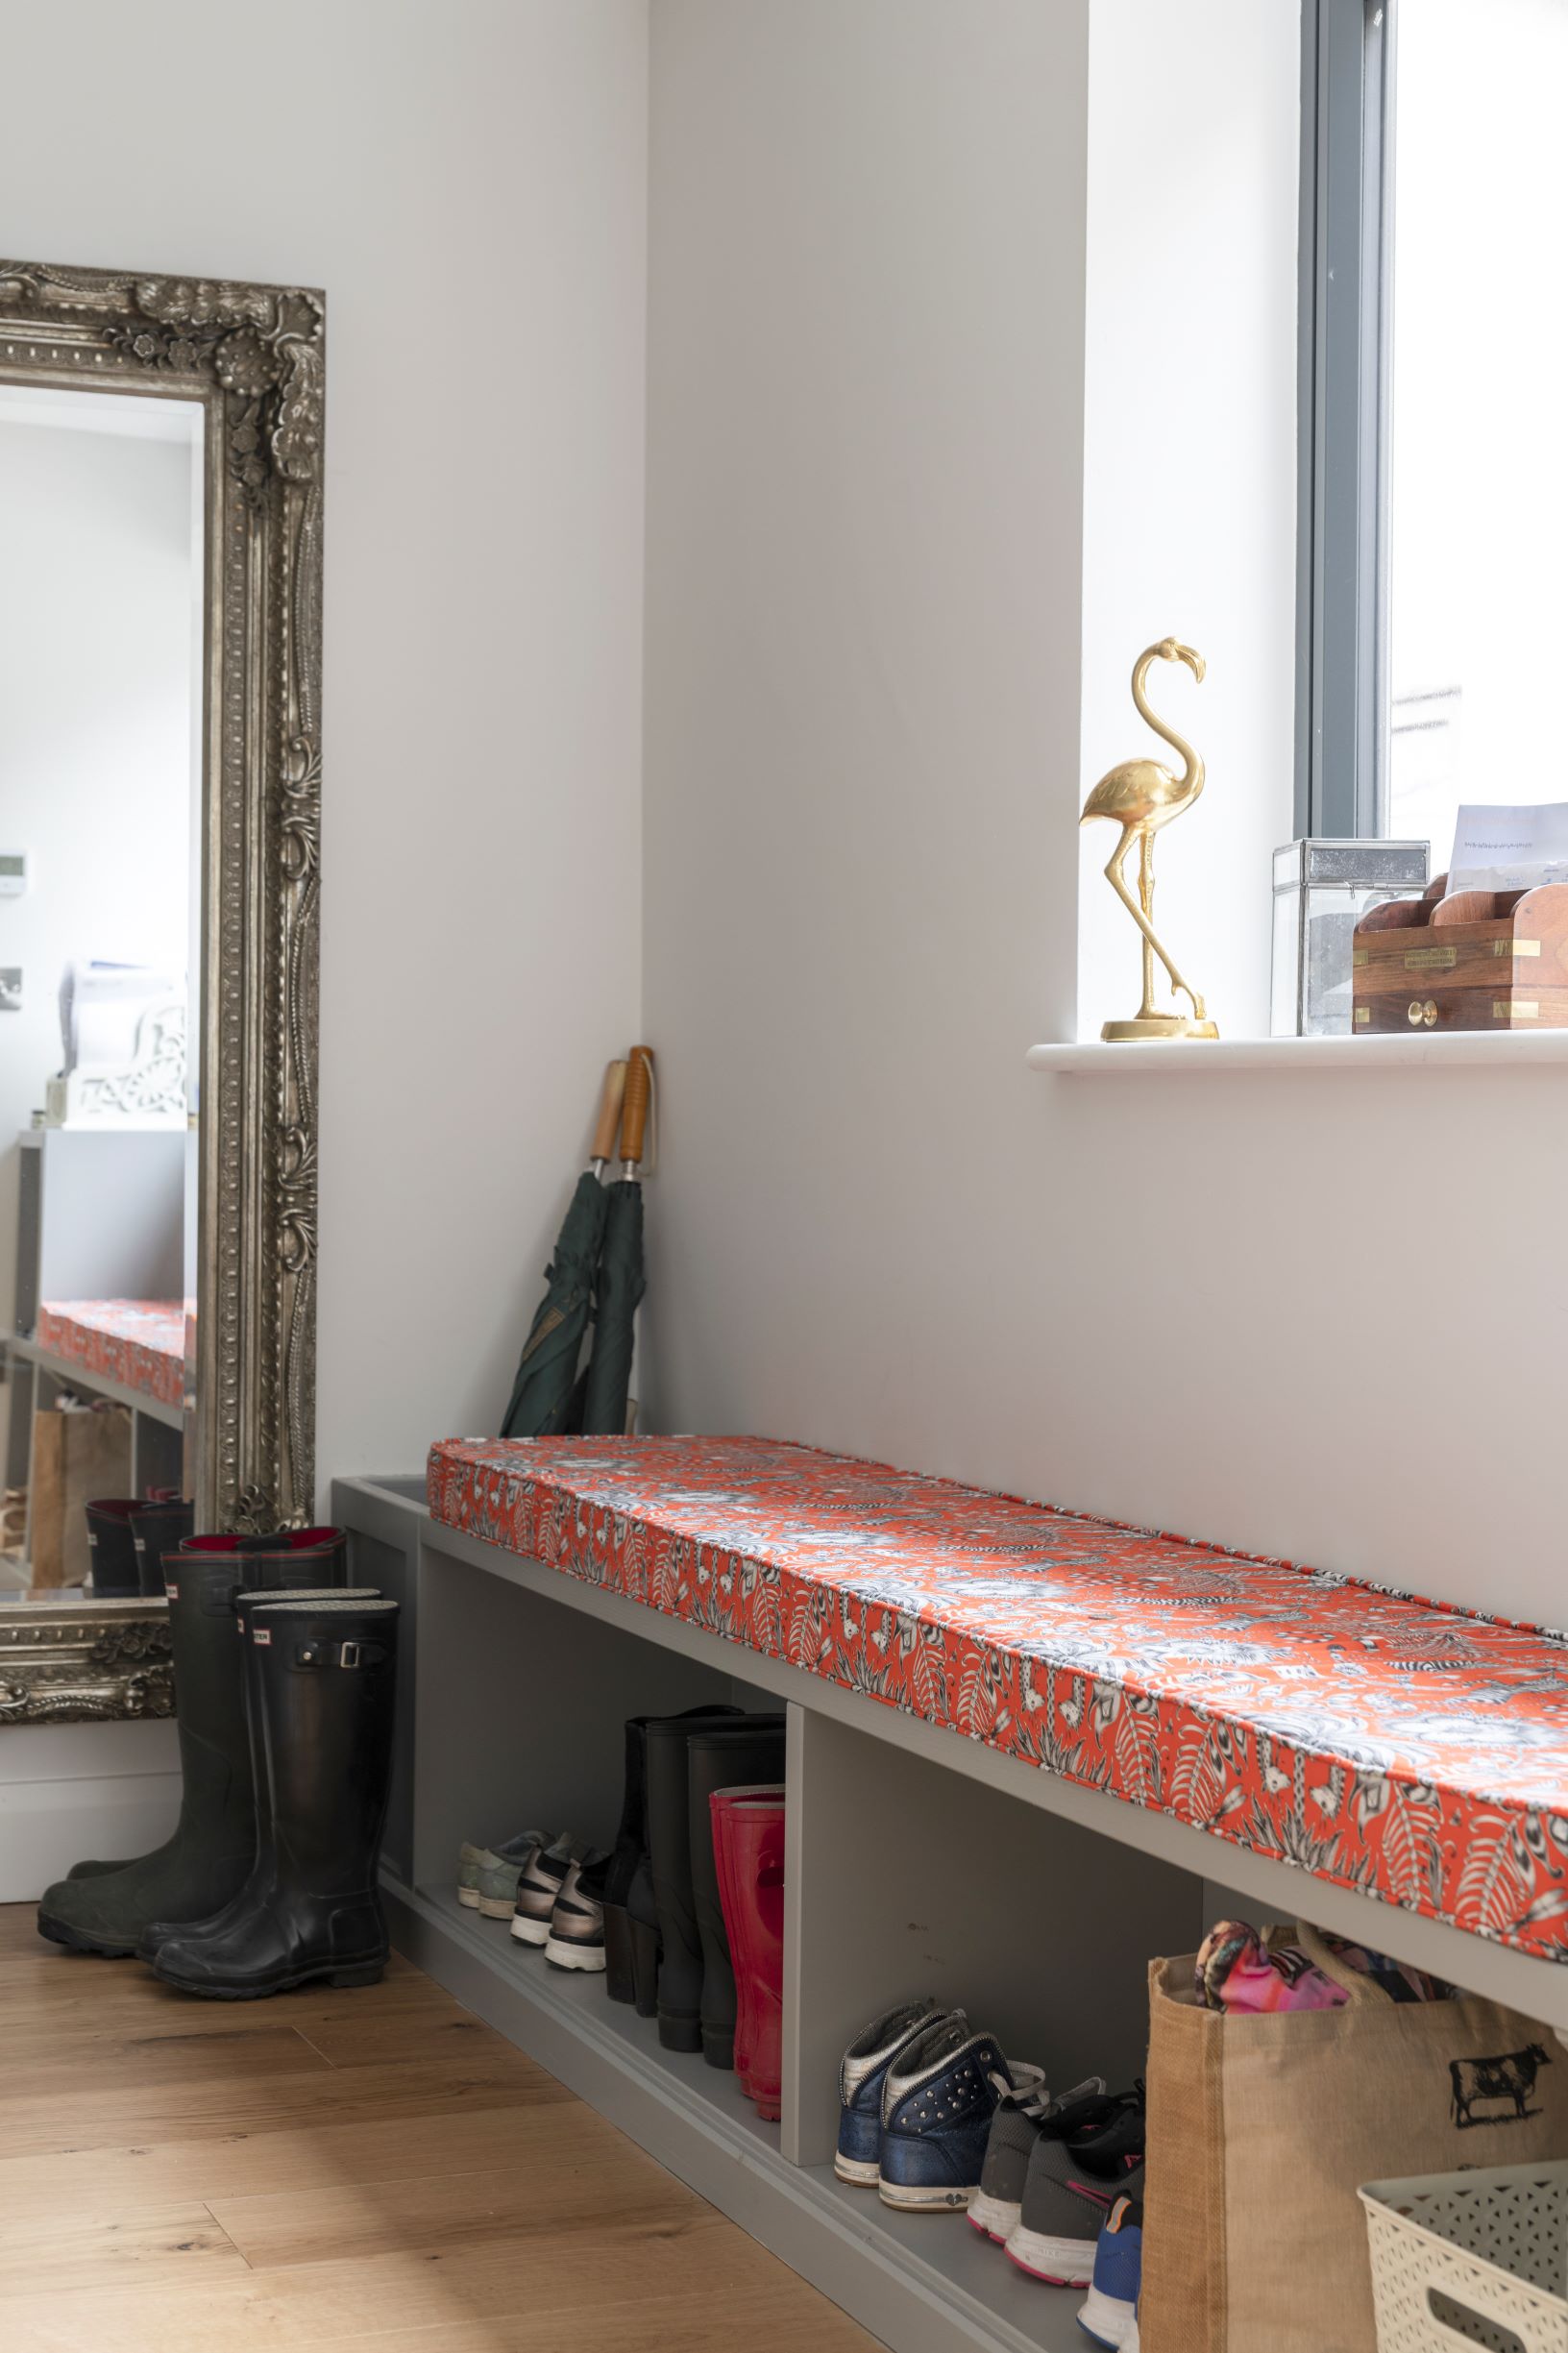 This boot room has plenty of storage and style to boot, thanks to the vibrant box cushion